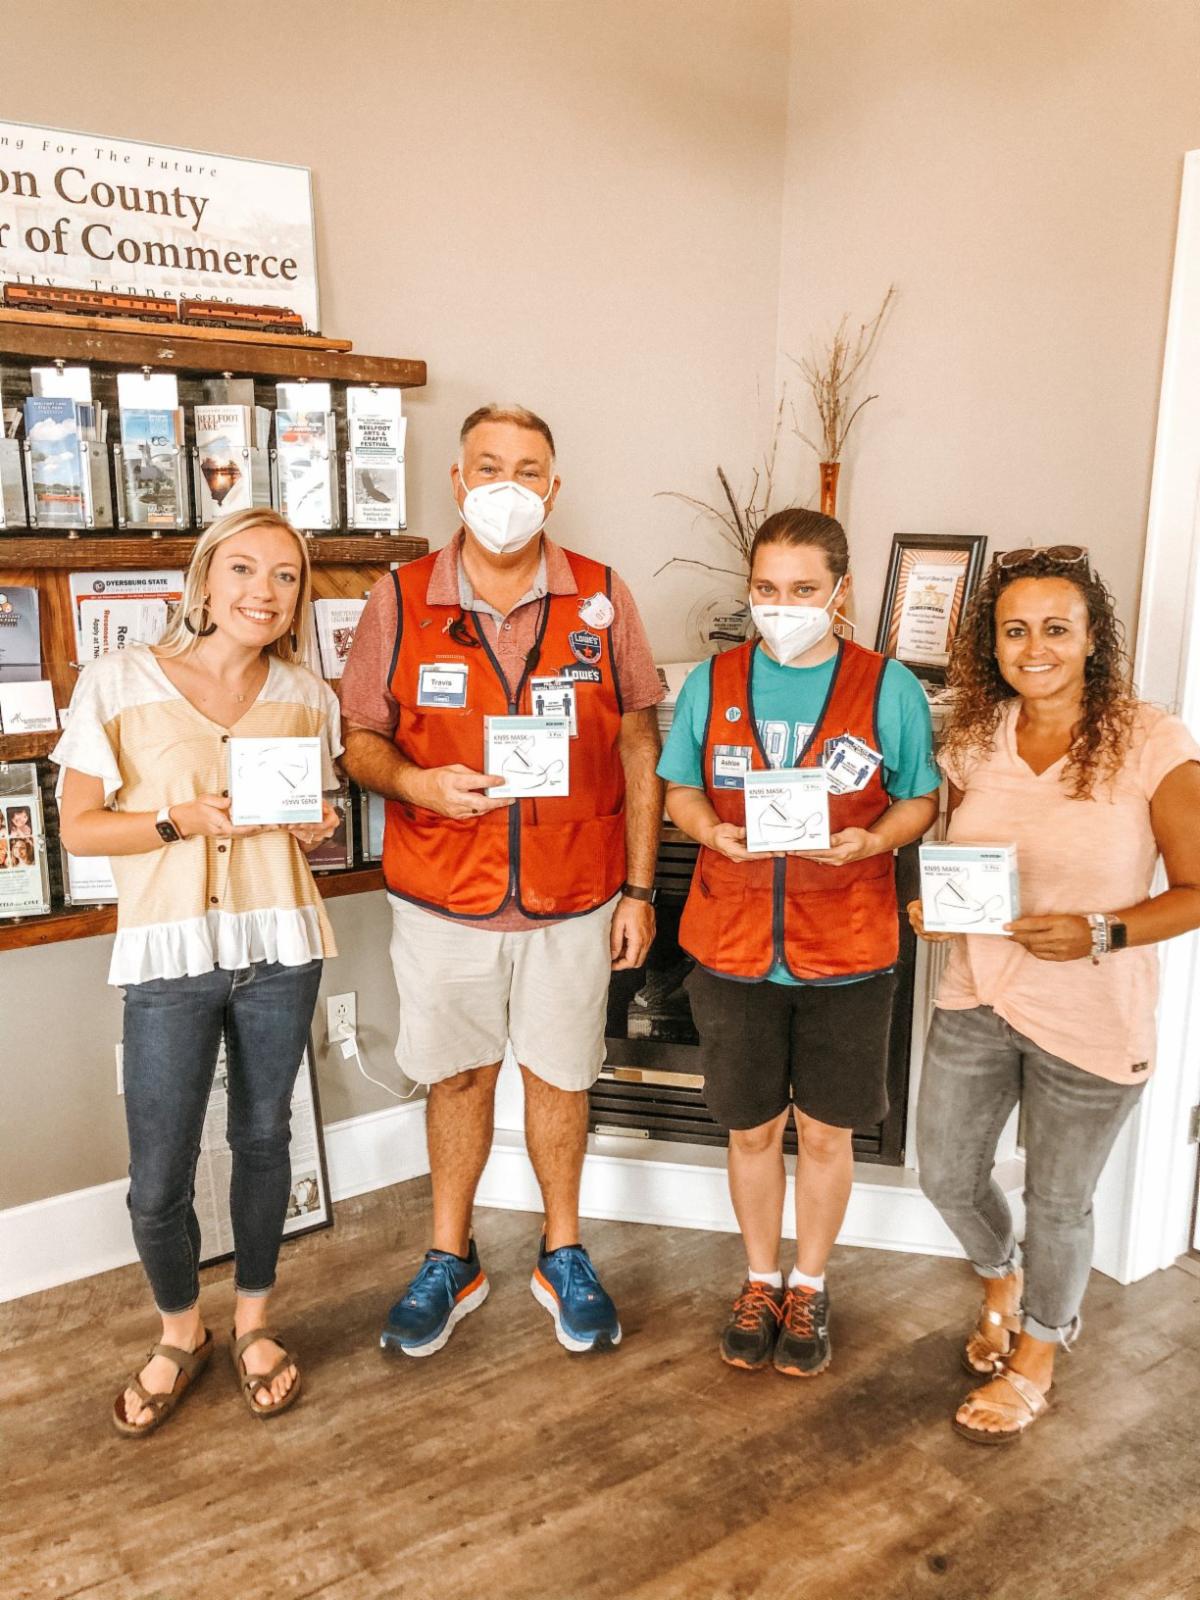 Local Businesses Distribute Masks and Hand Sanitizer to Community